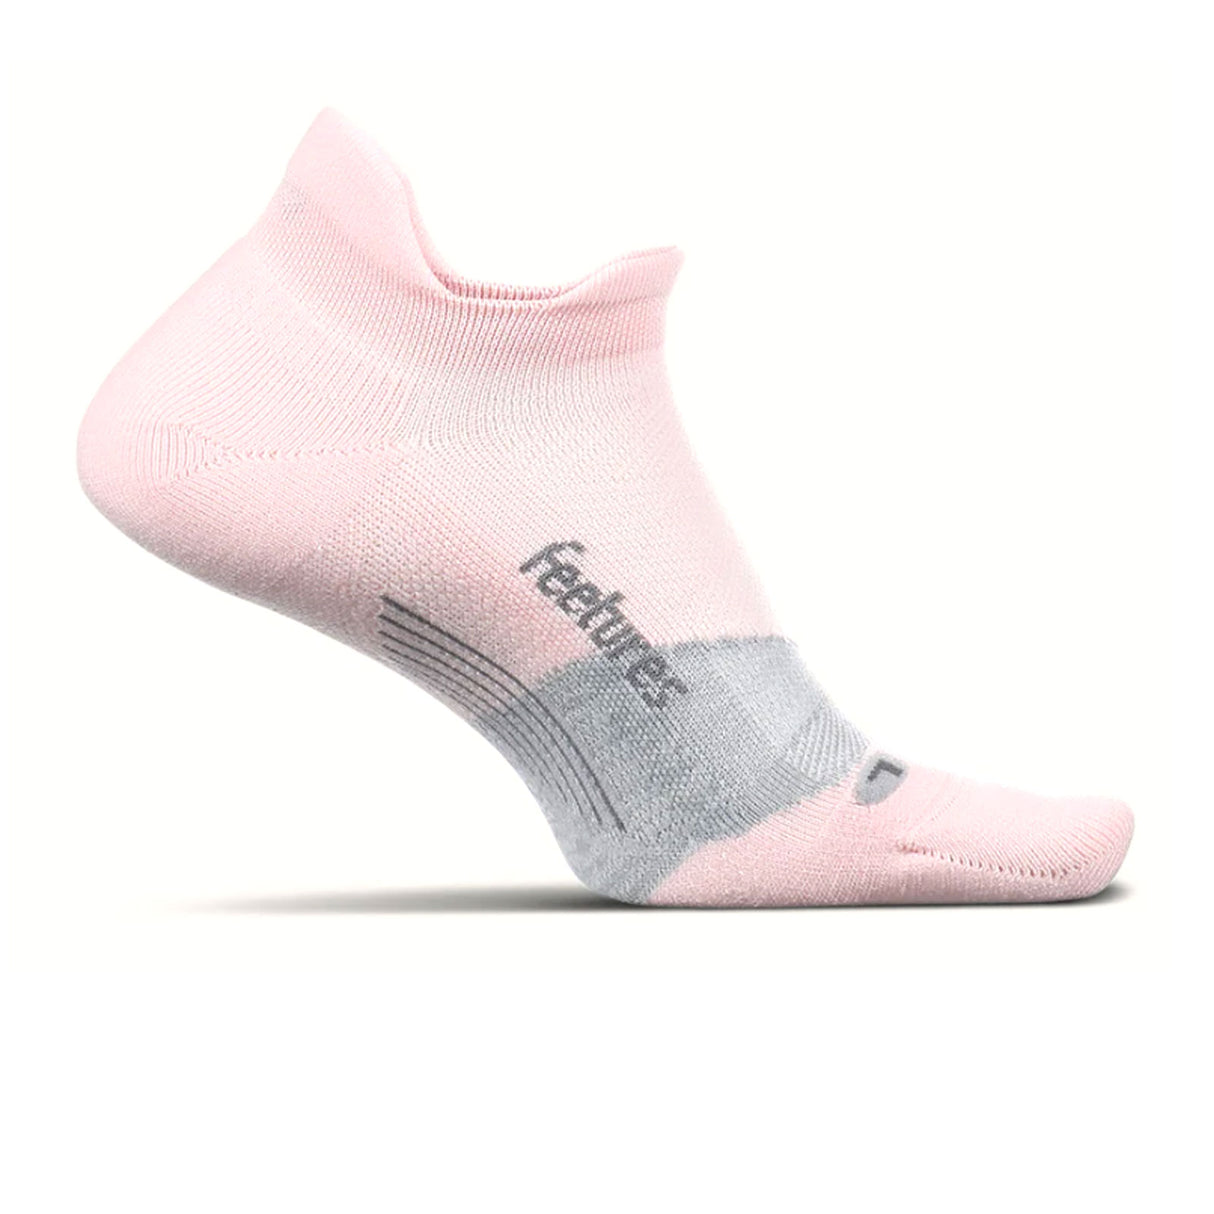 Feetures Elite Max Cushion No Show Tab Sock (Unisex) - Propulsion Pink Socks - Life - No Show - The Heel Shoe Fitters